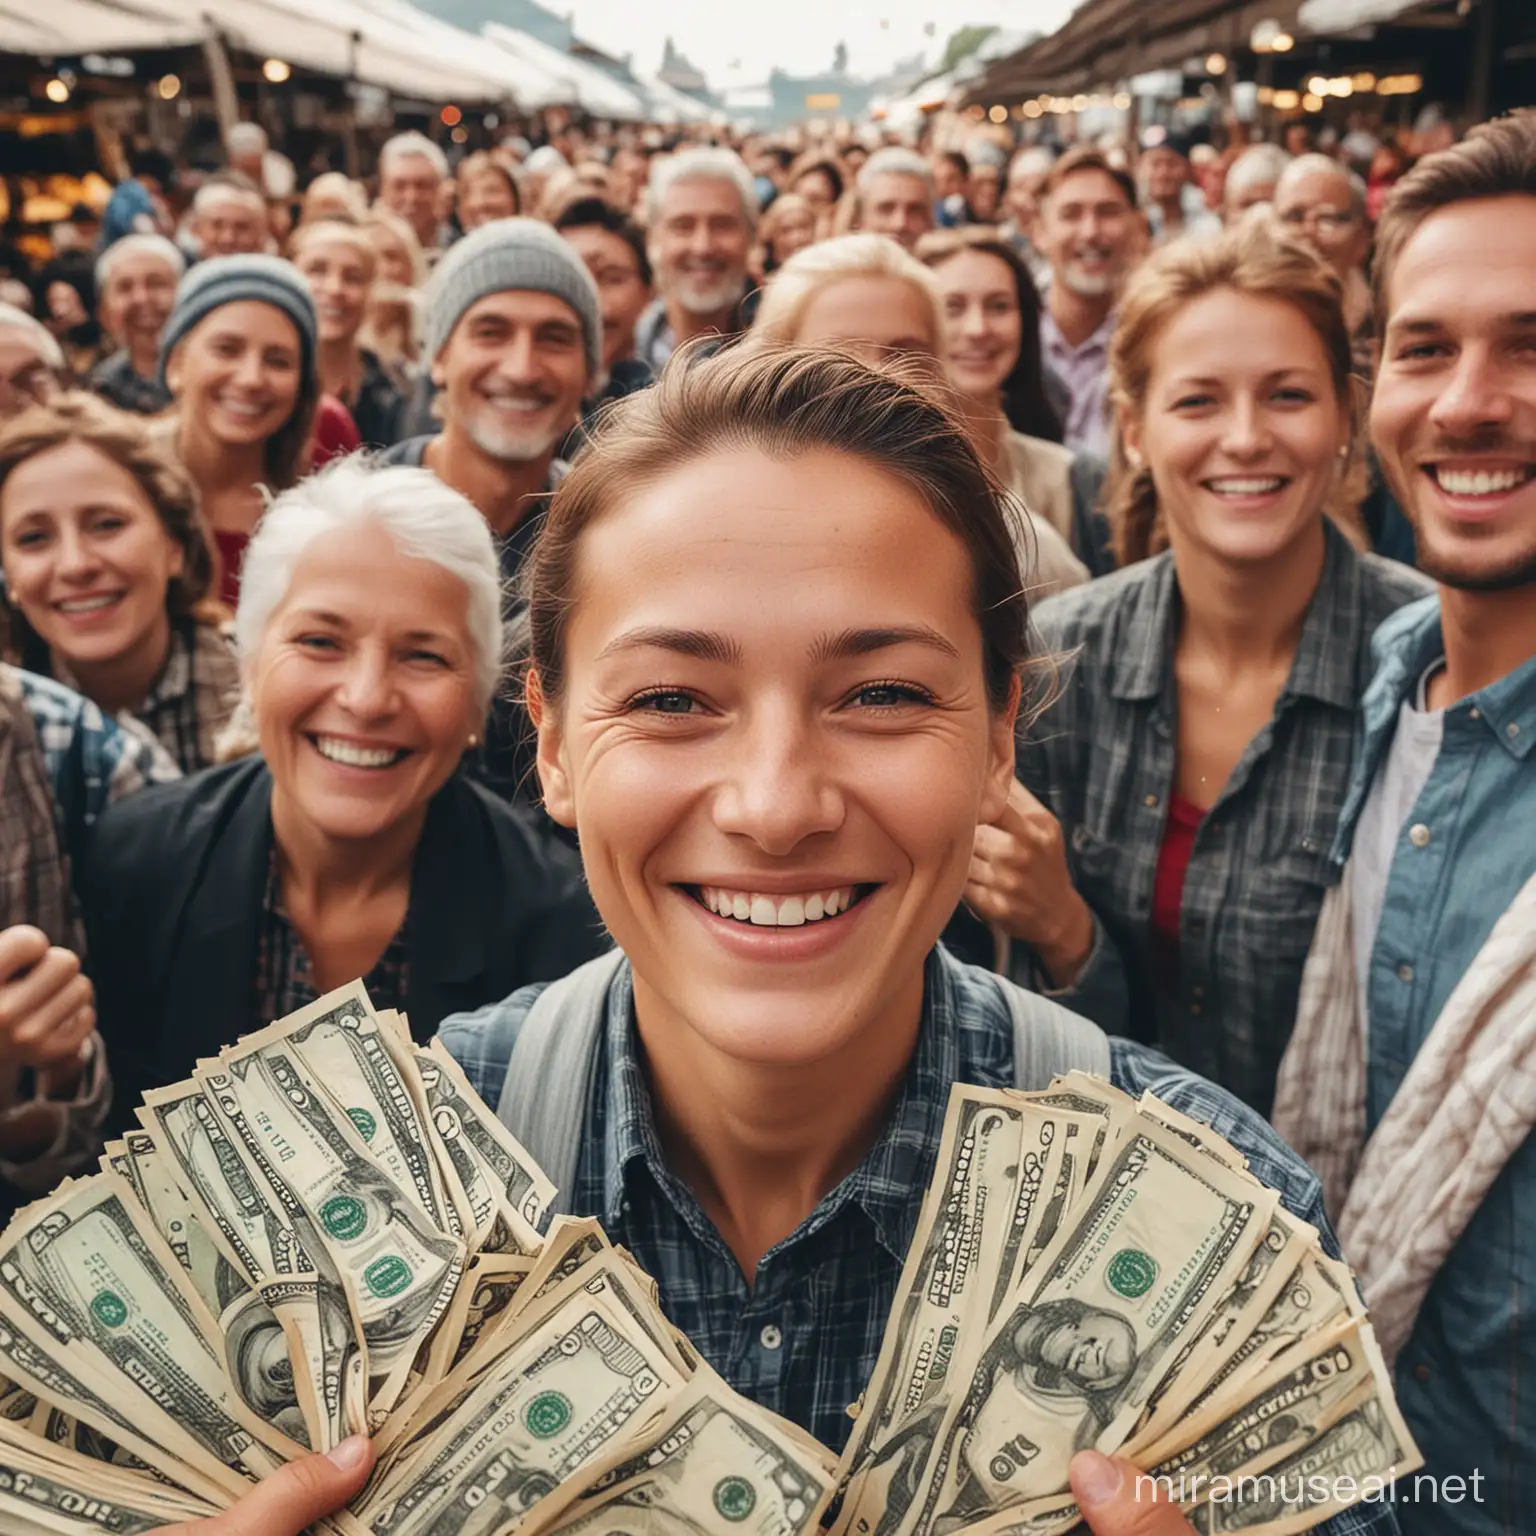 generate image with a lot of people. people are happy and smile. they are rich becouse they earn a lot of money in stoch market.